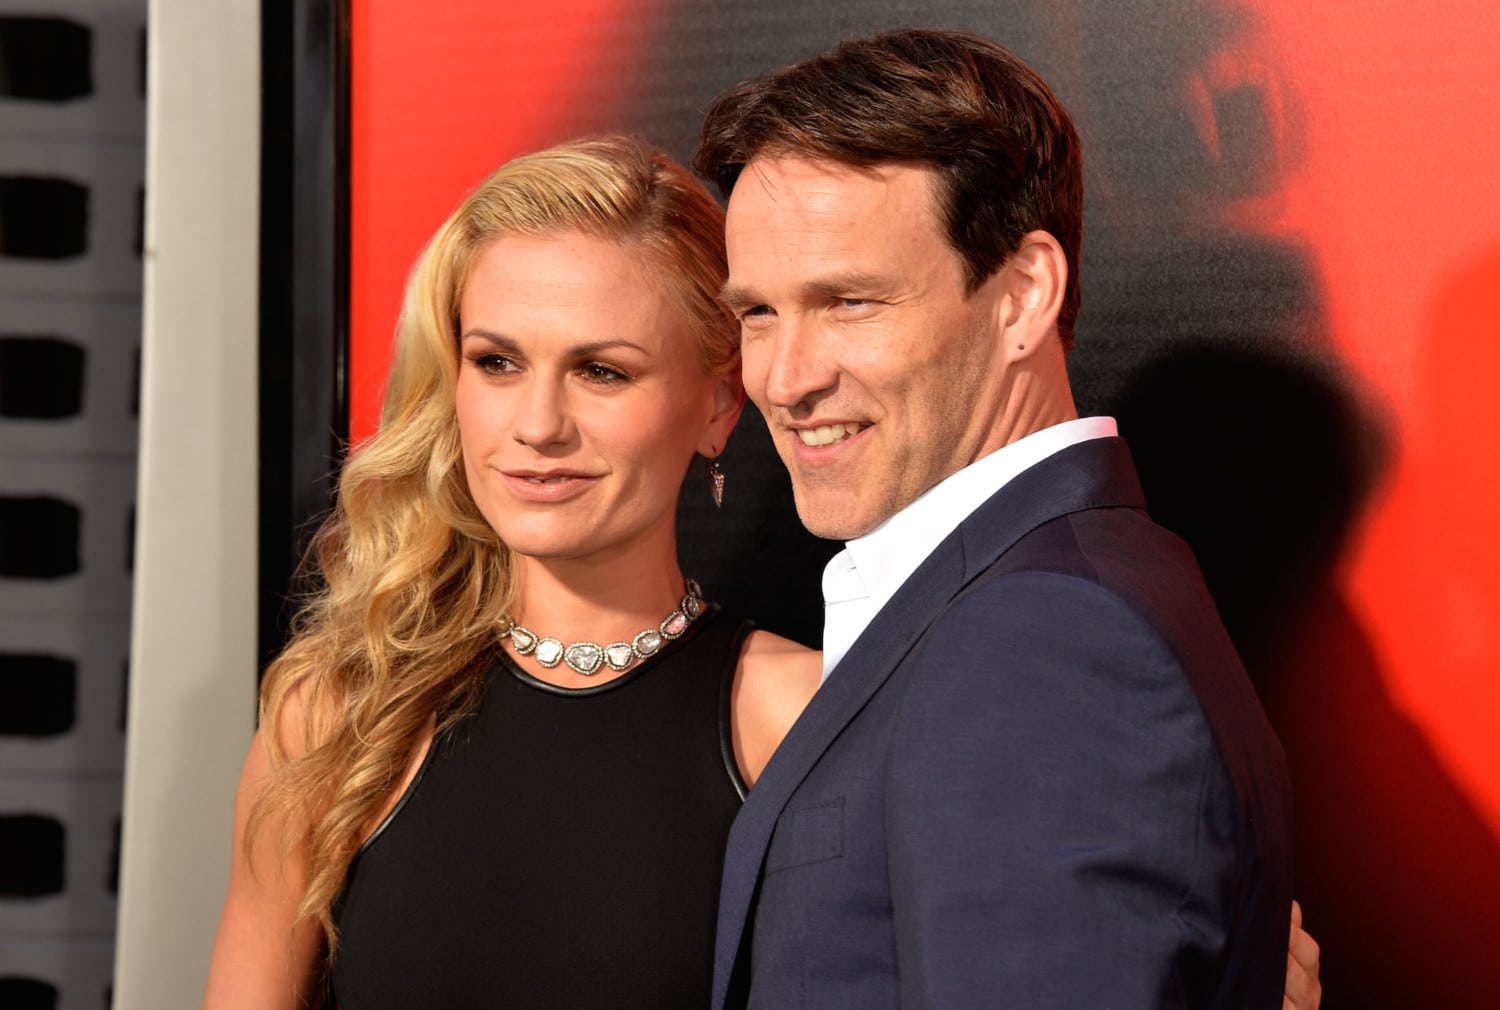 Anna Paquin and Stephen Moyer photo